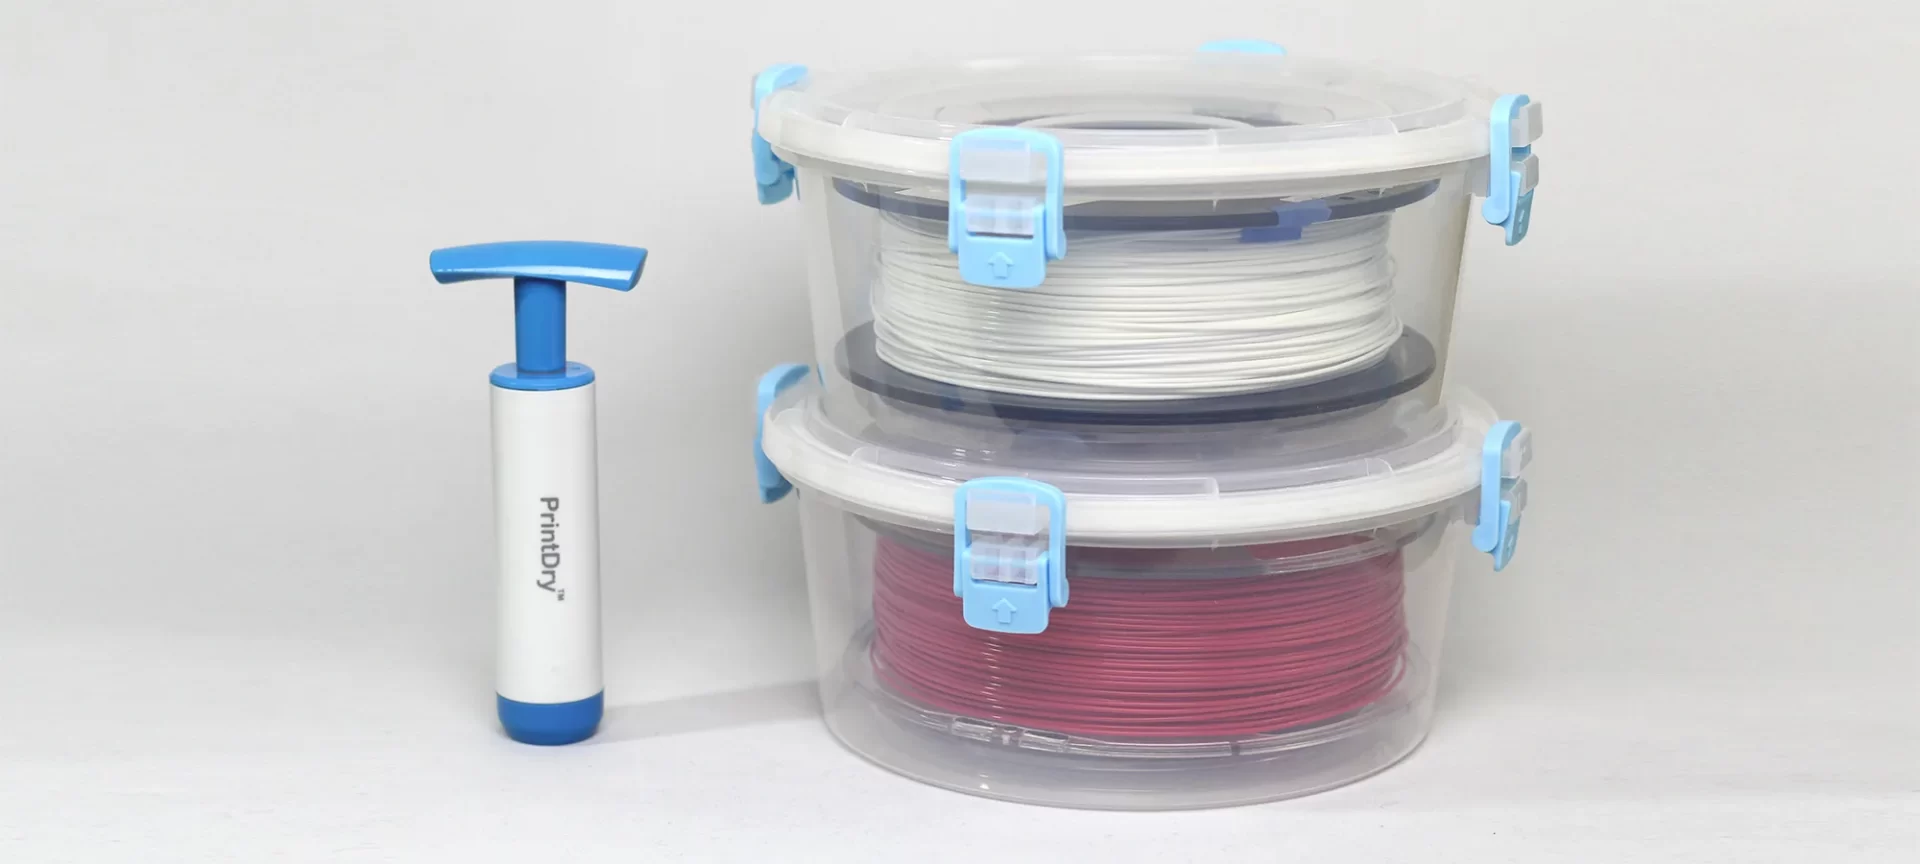 printdry filament container